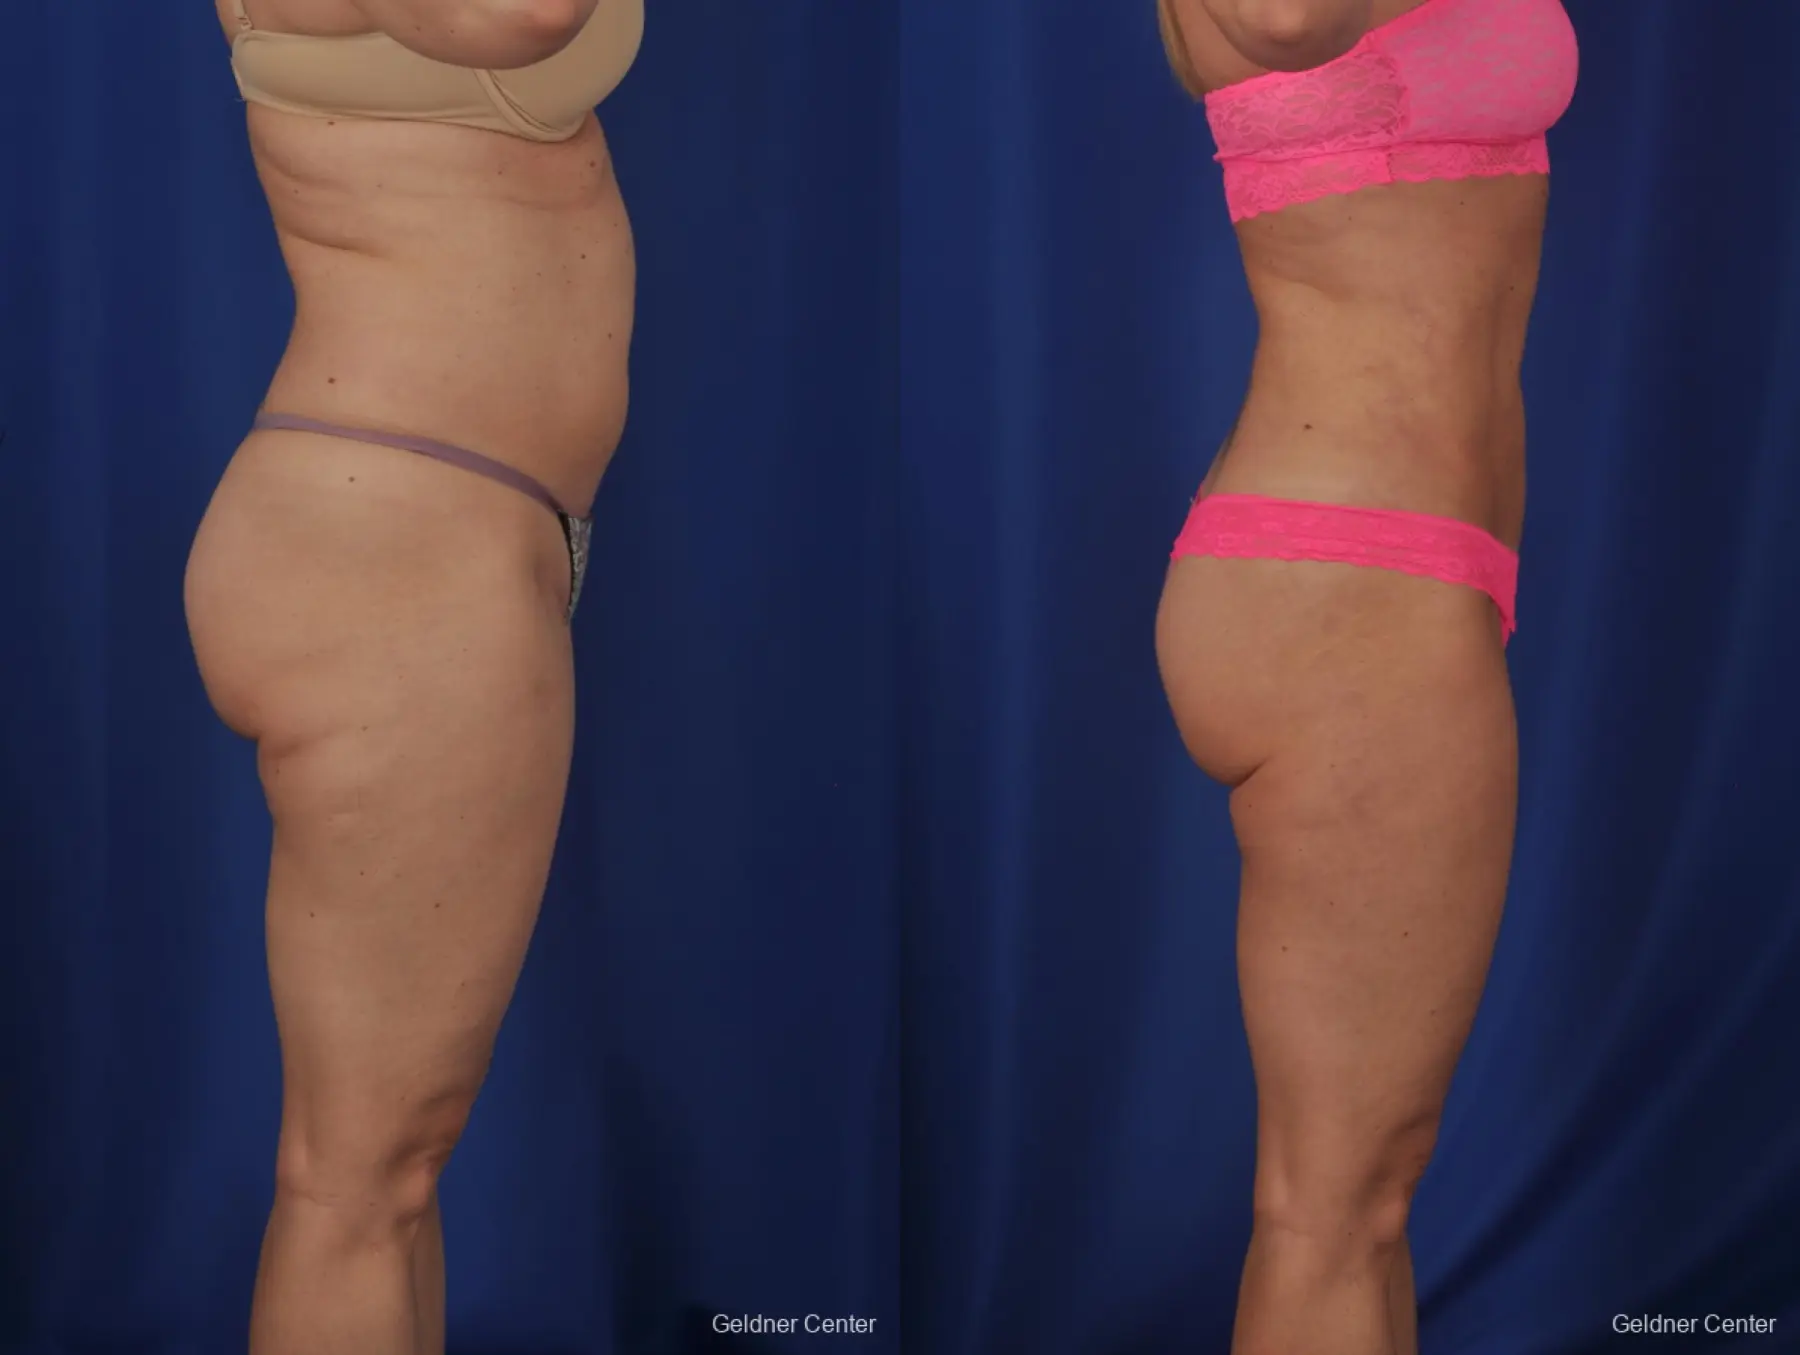 Vaser lipo patient 2069 before and after photos - Before and After 2